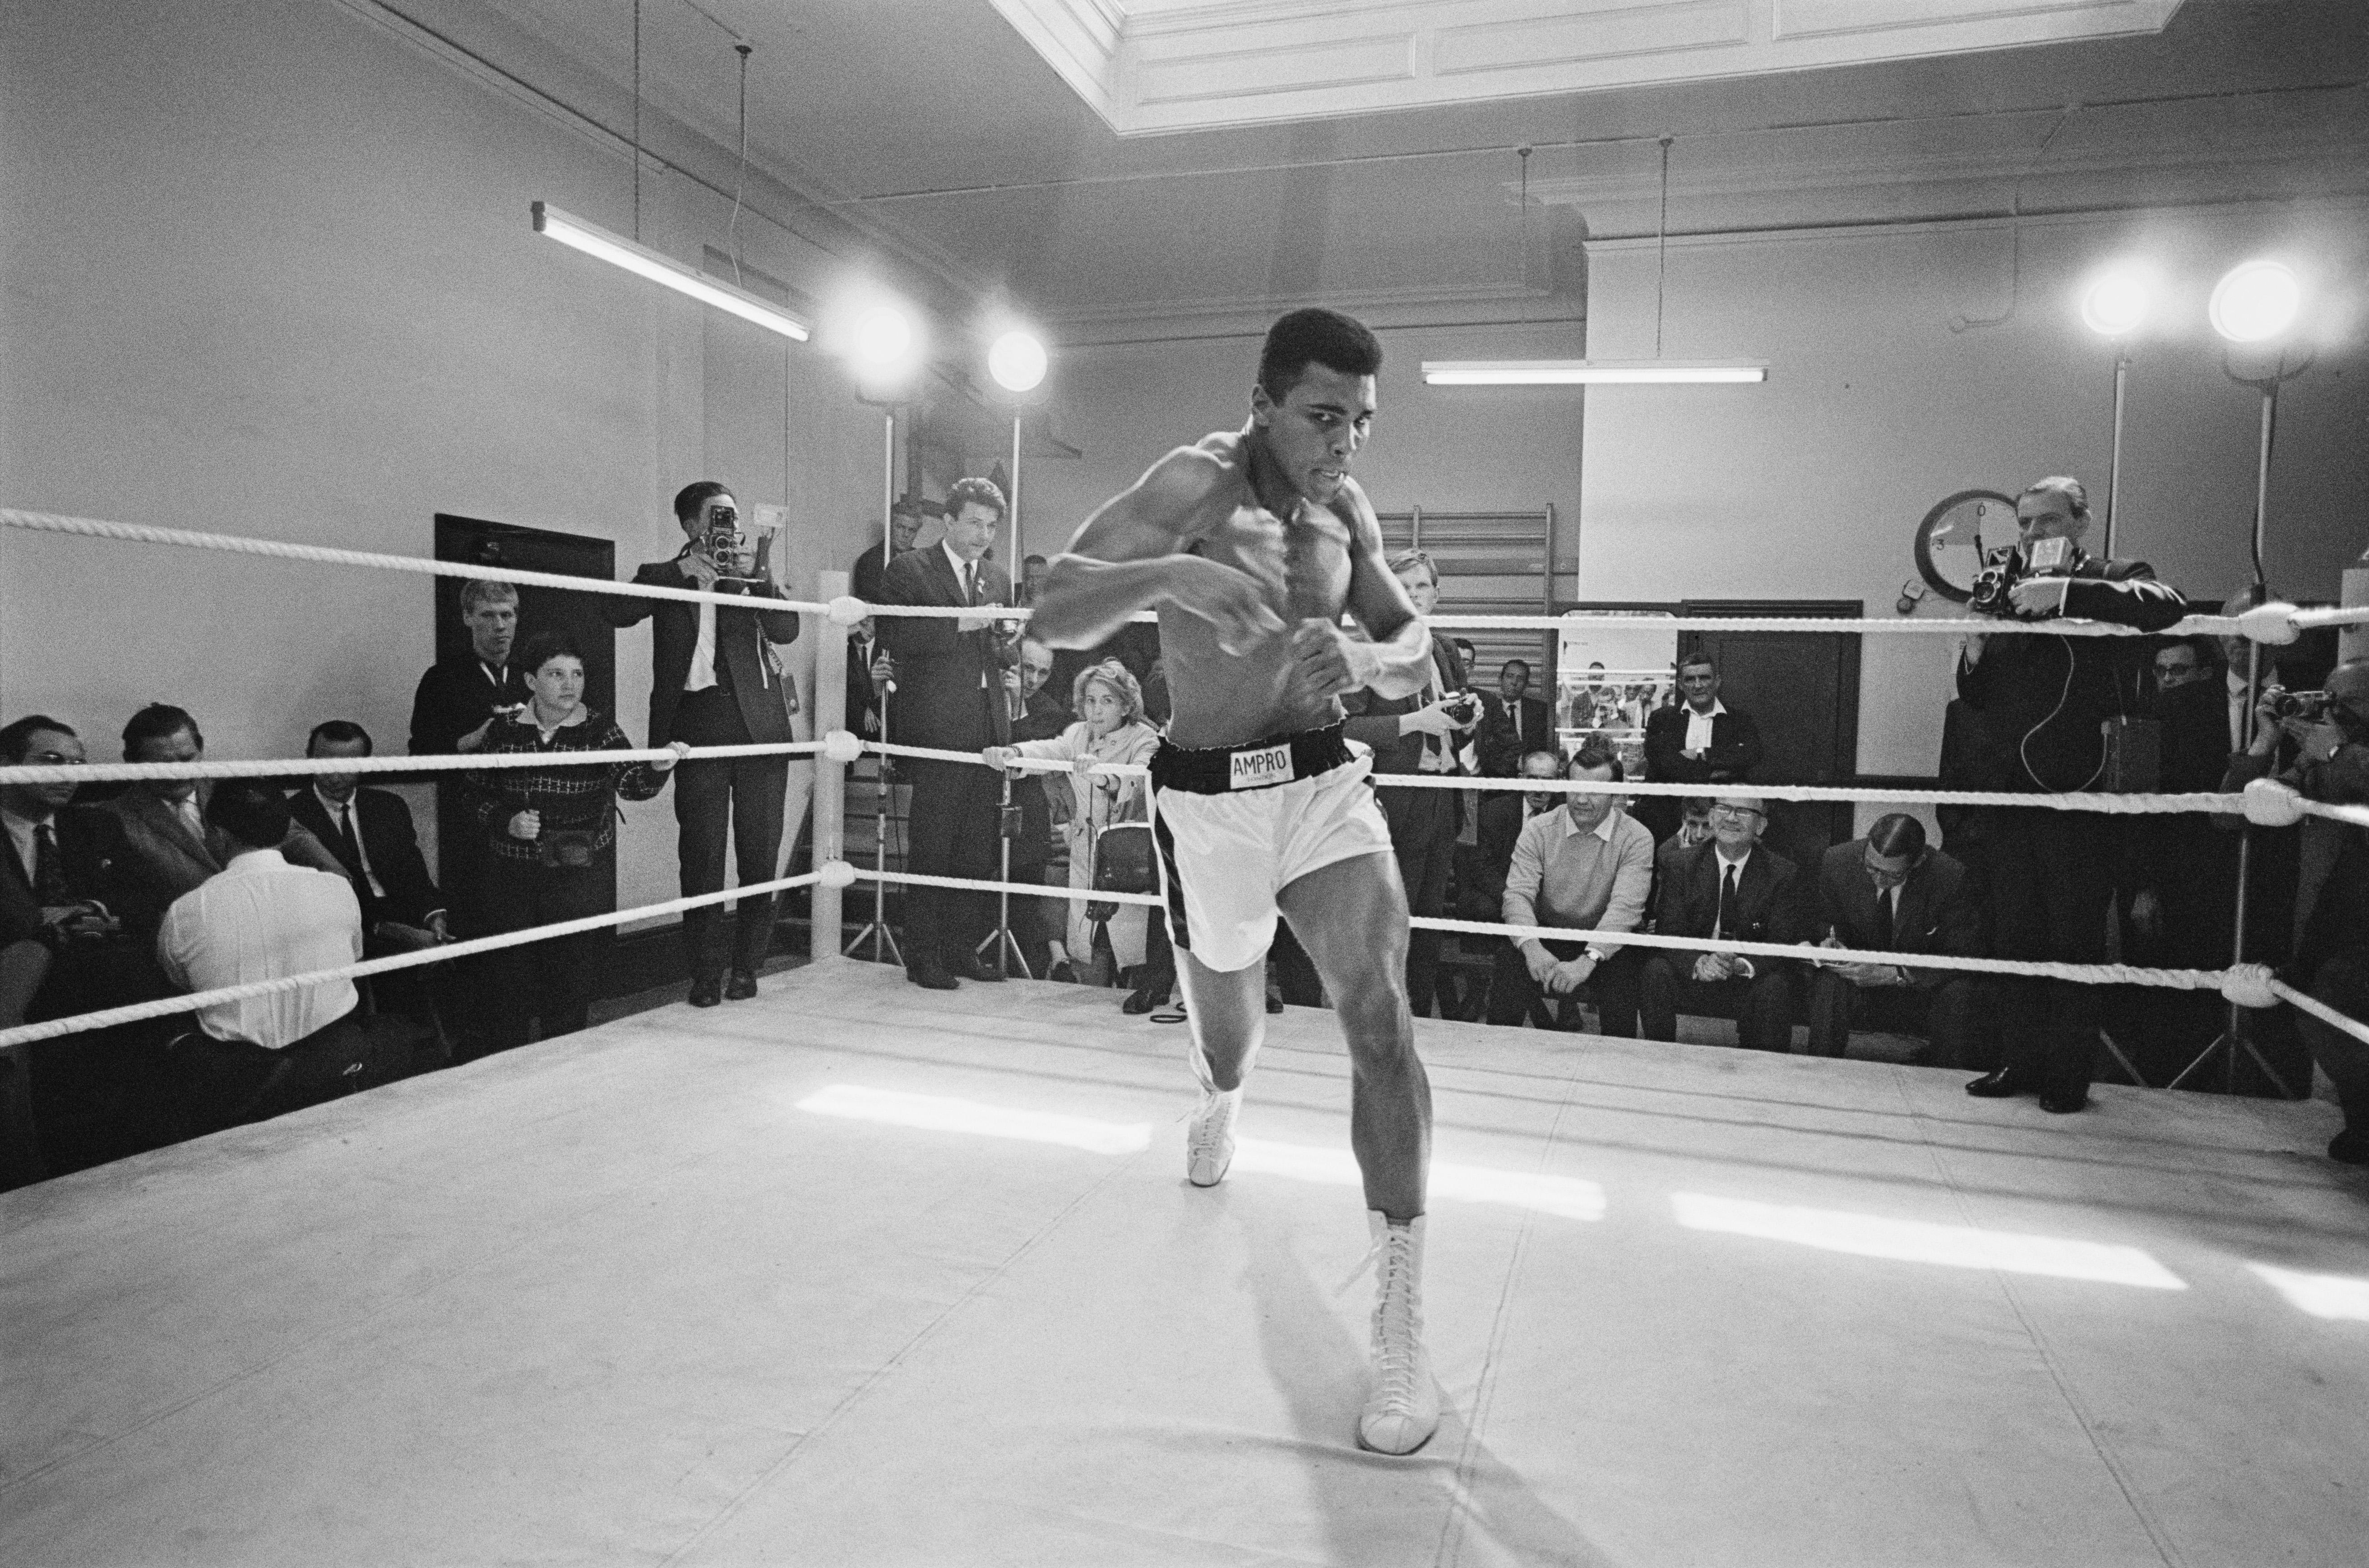 Unknown Black and White Photograph - 'Ali in Training' by R. McPhedran, Limited Edition Photograph Print, 20x16